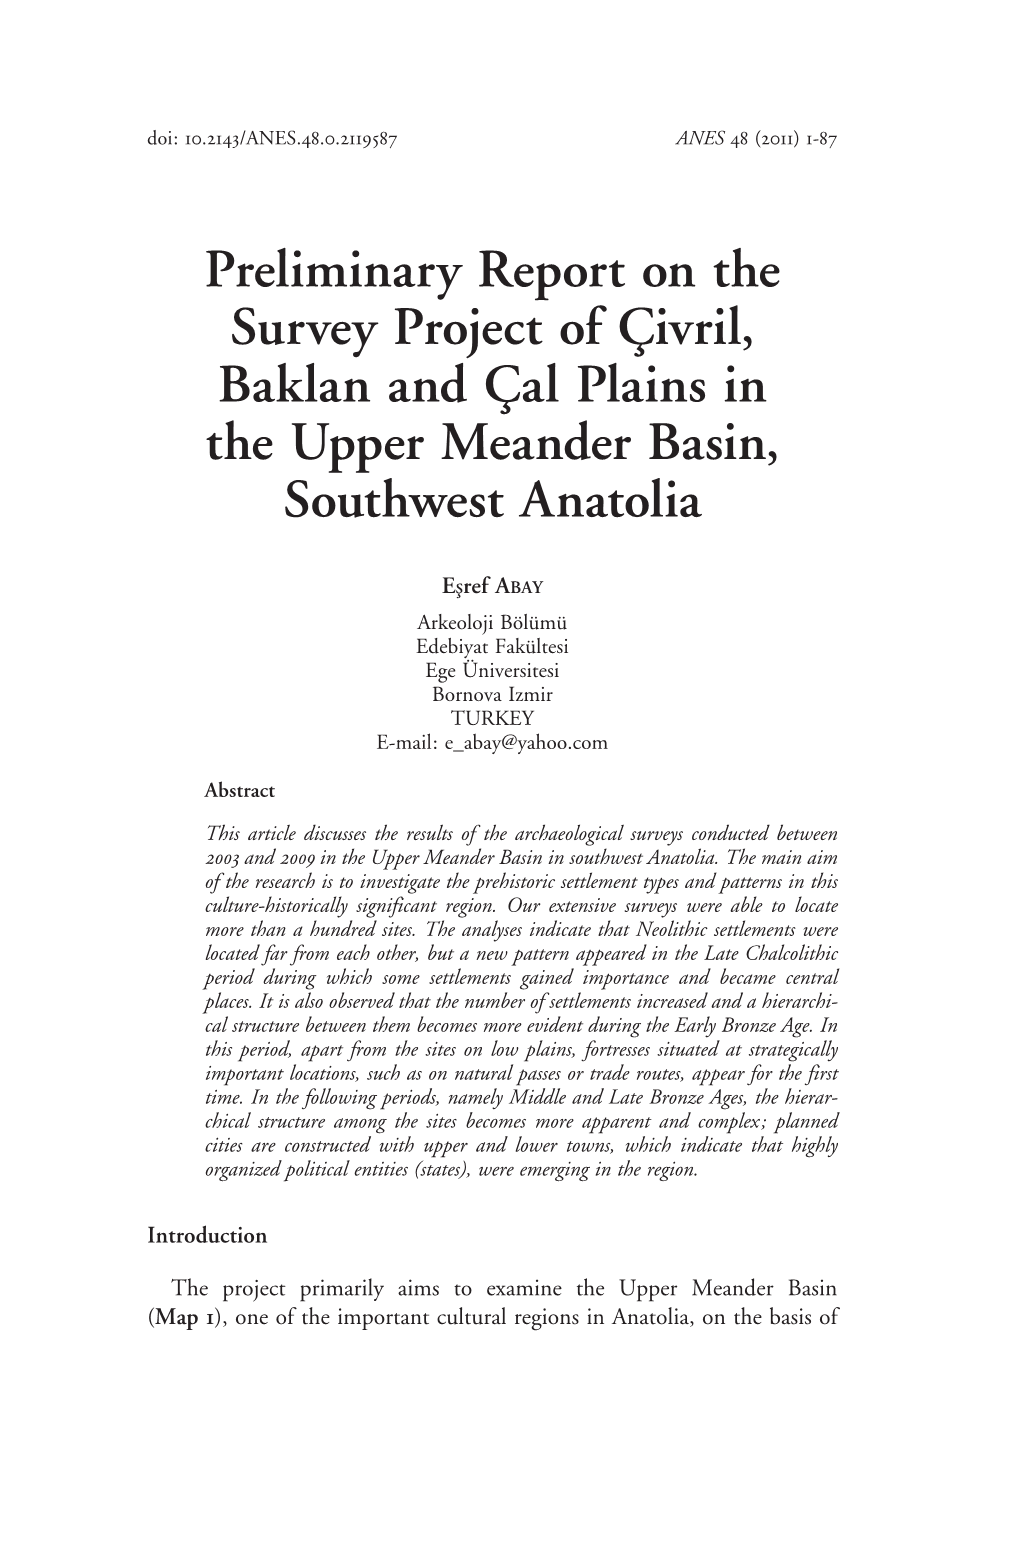 Preliminary Report on the Survey Project of Çivril, Baklan and Çal Plains in the Upper Meander Basin, Southwest Anatolia